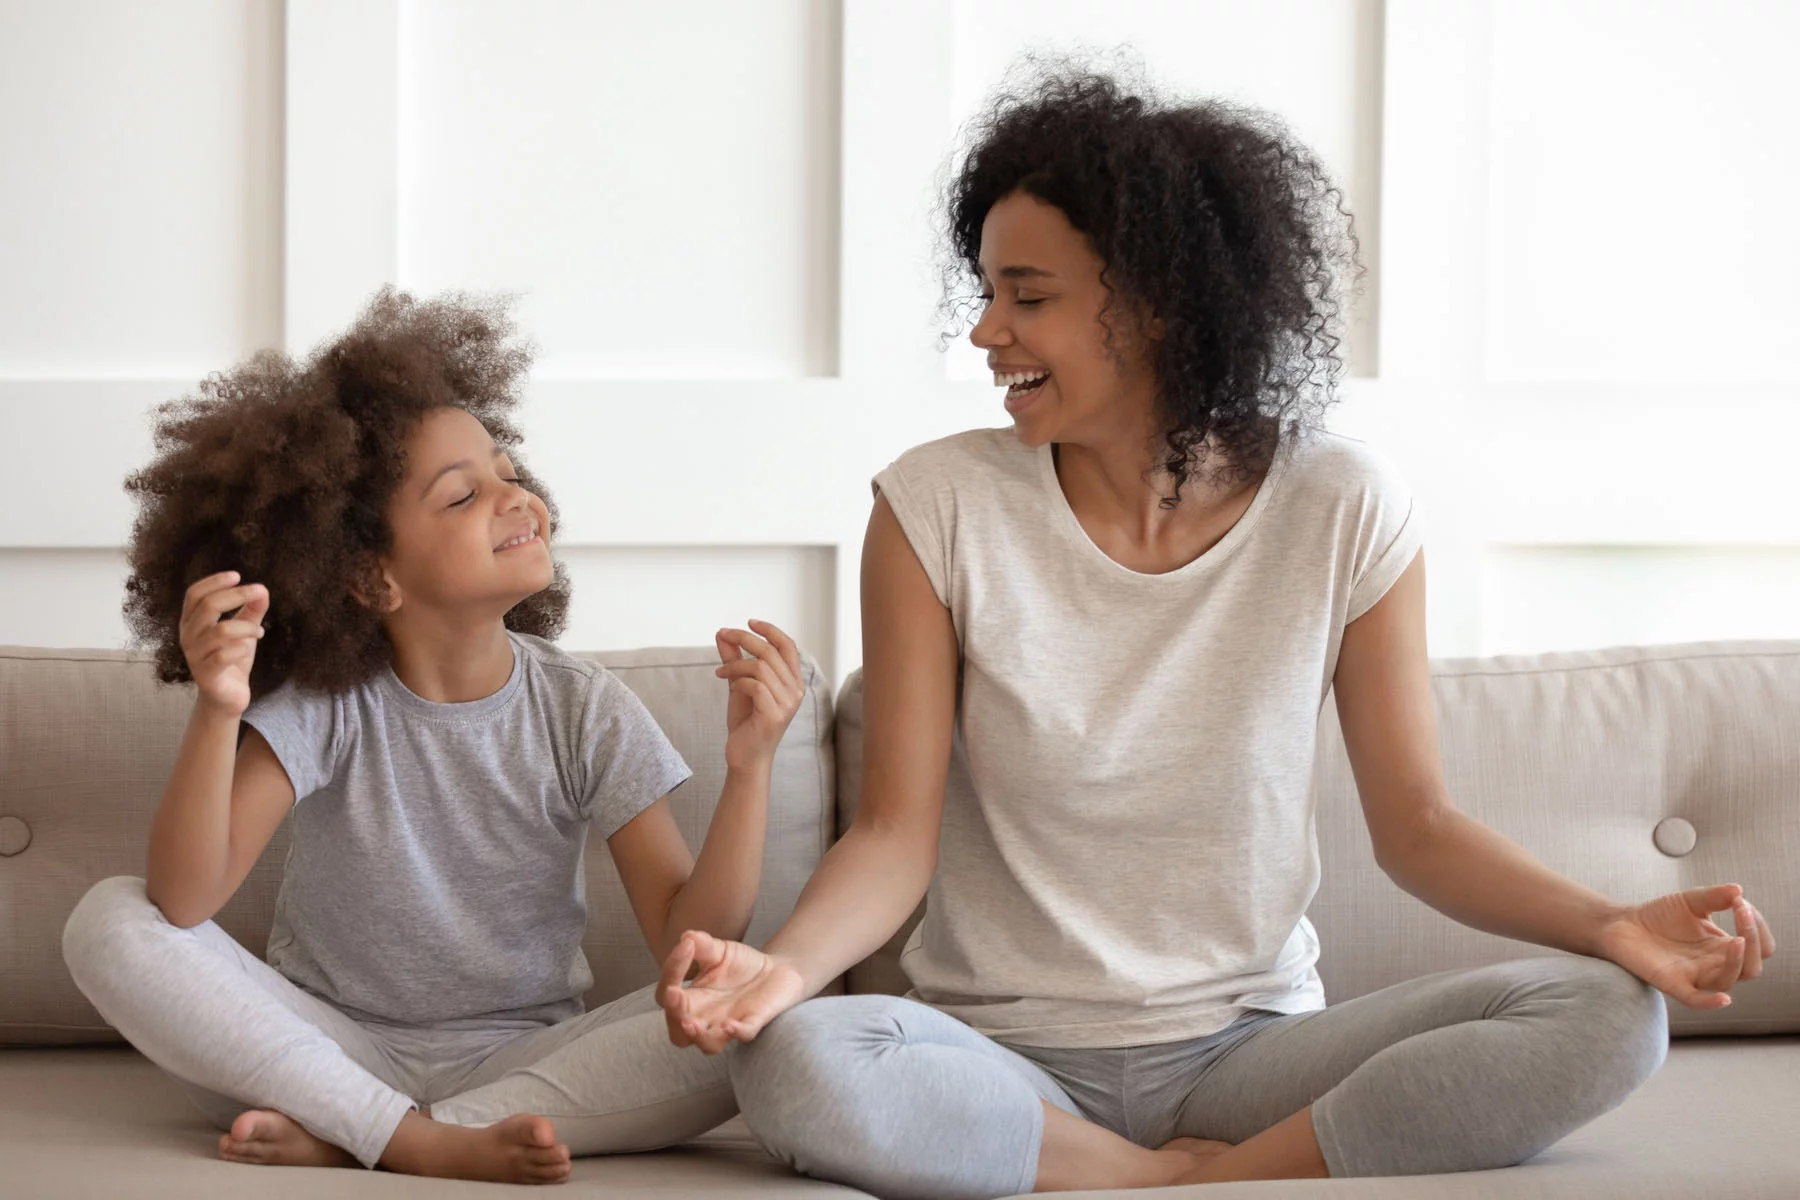 Luxembourg mental health: a mom and daughter meditating 